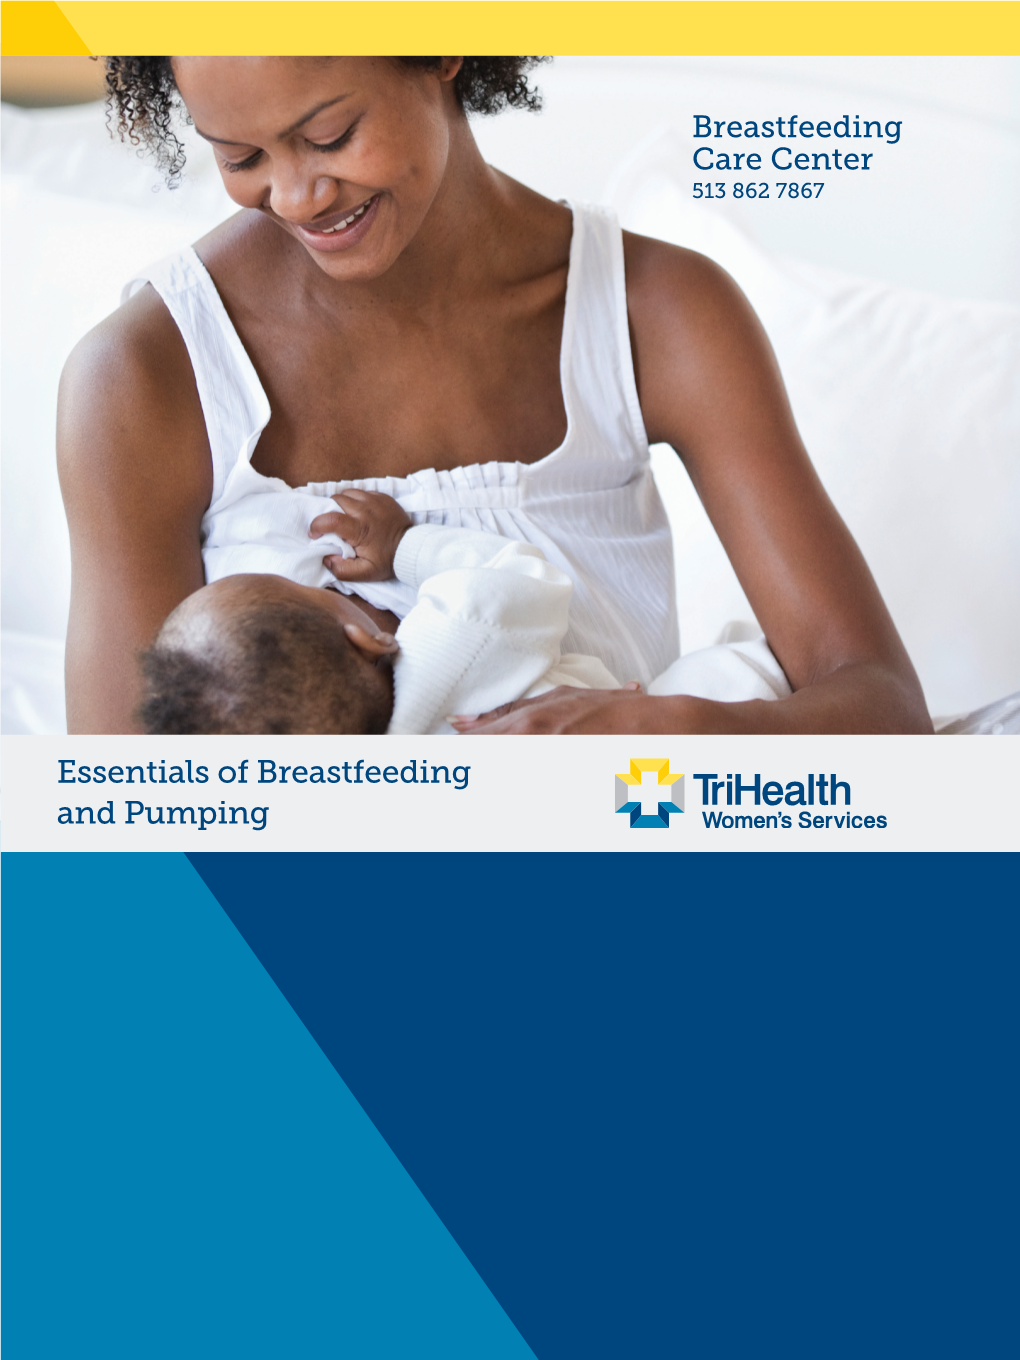 Essentials of Breastfeeding and Pumping